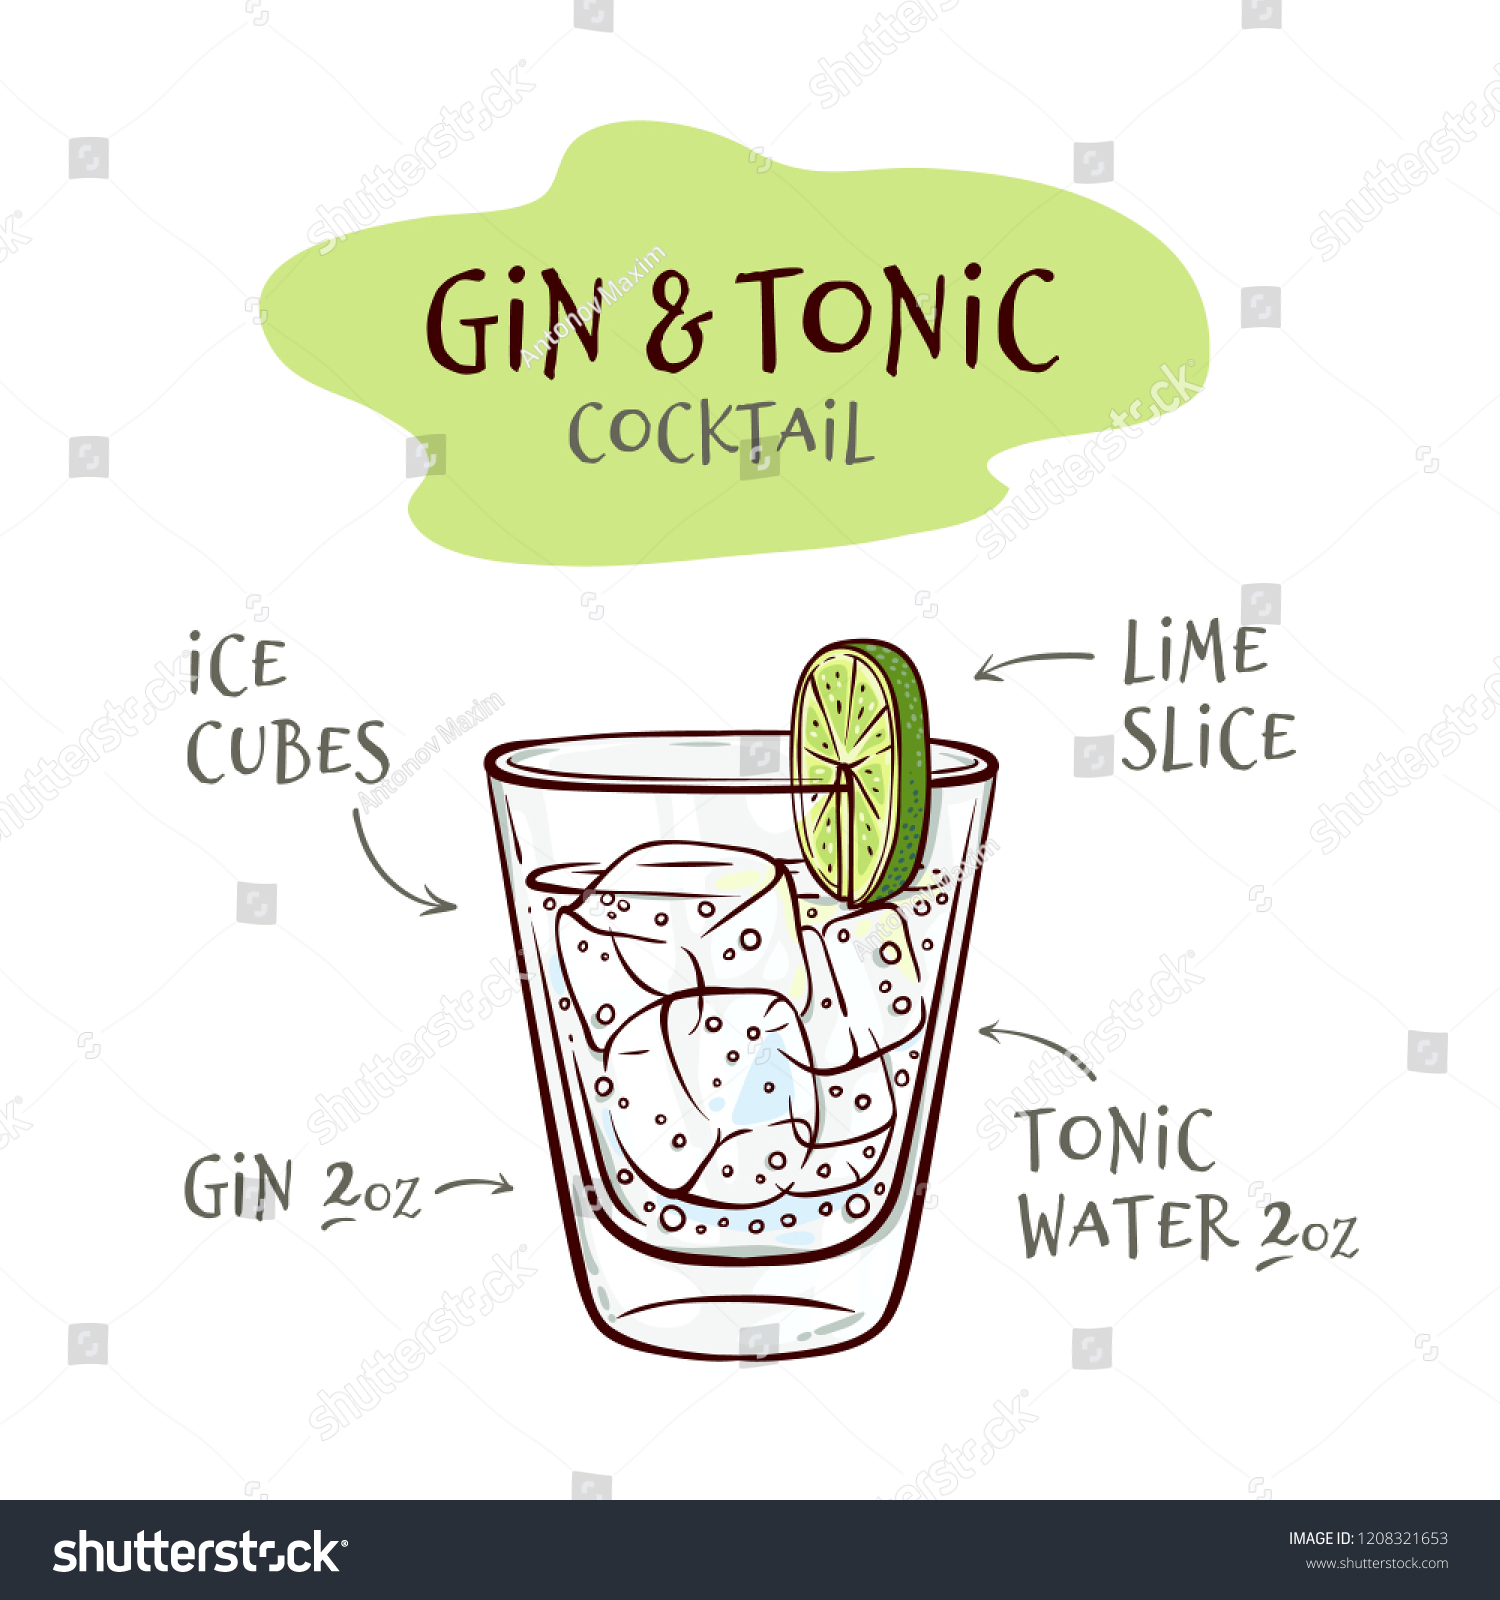 Vector Illustration Gin Tonic Cocktail Recipe Stock Vector Royalty Free 1208321653,Mind Eraser